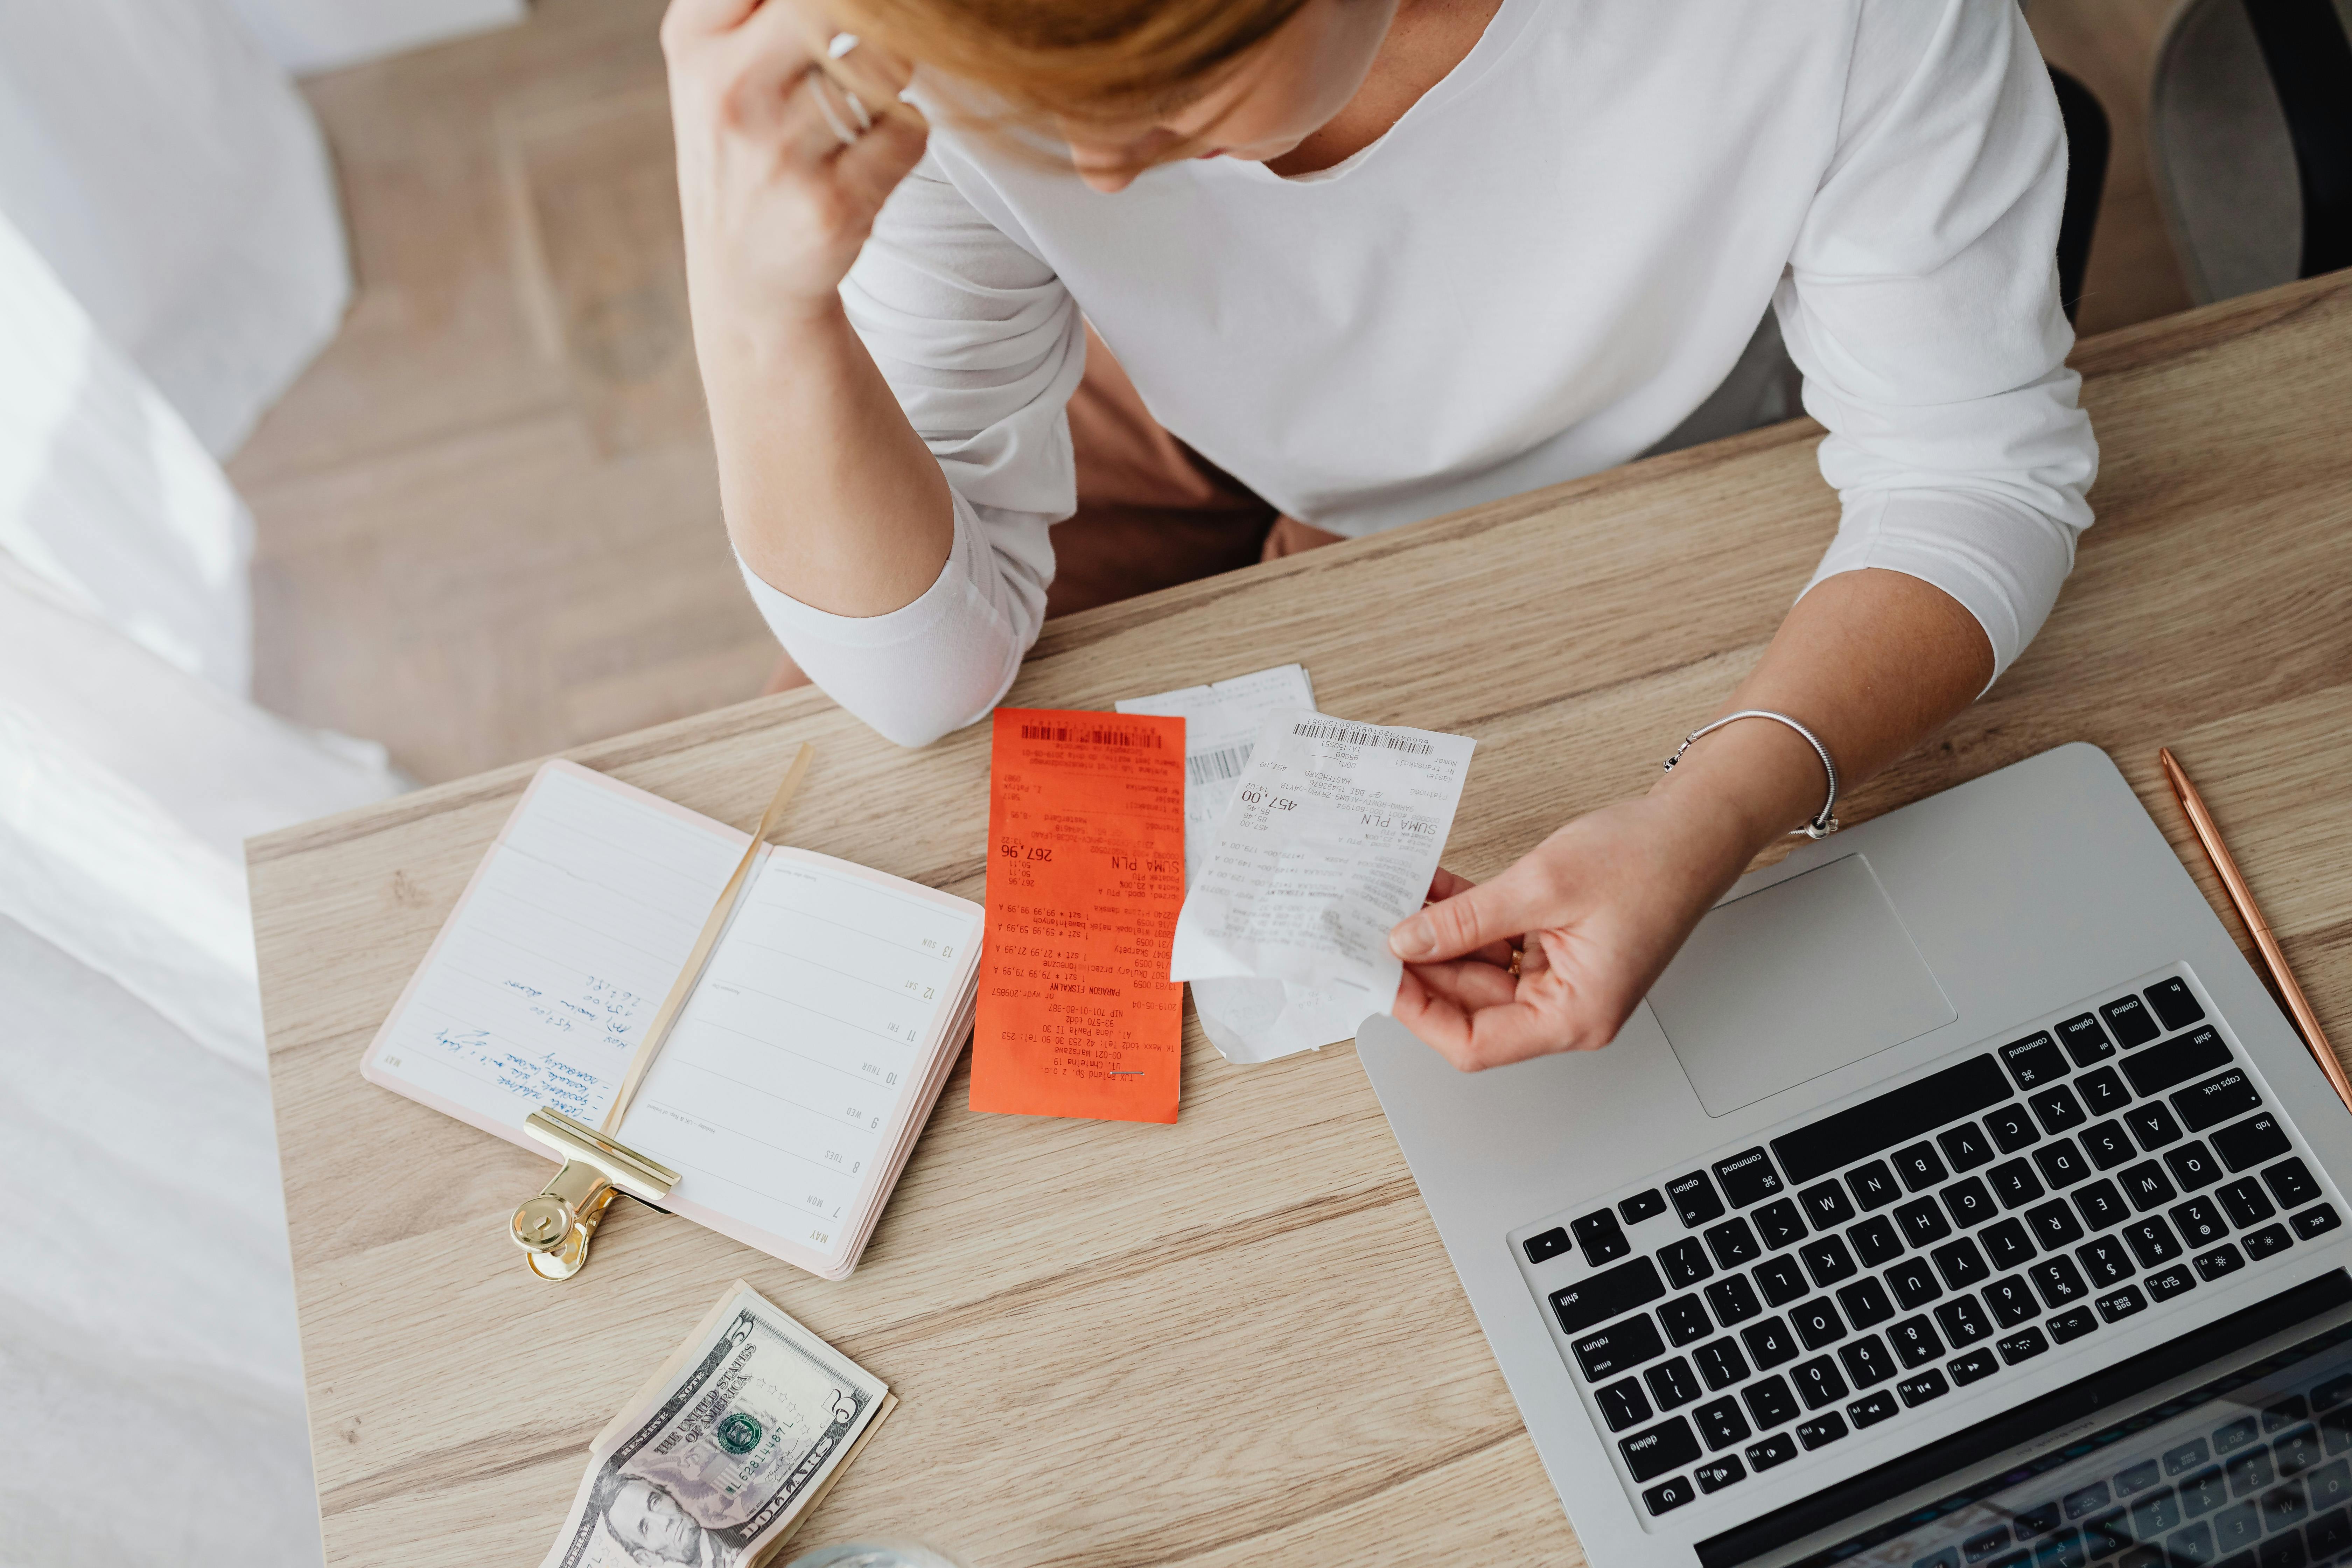 A woman looking over receipts | Source: Pexels